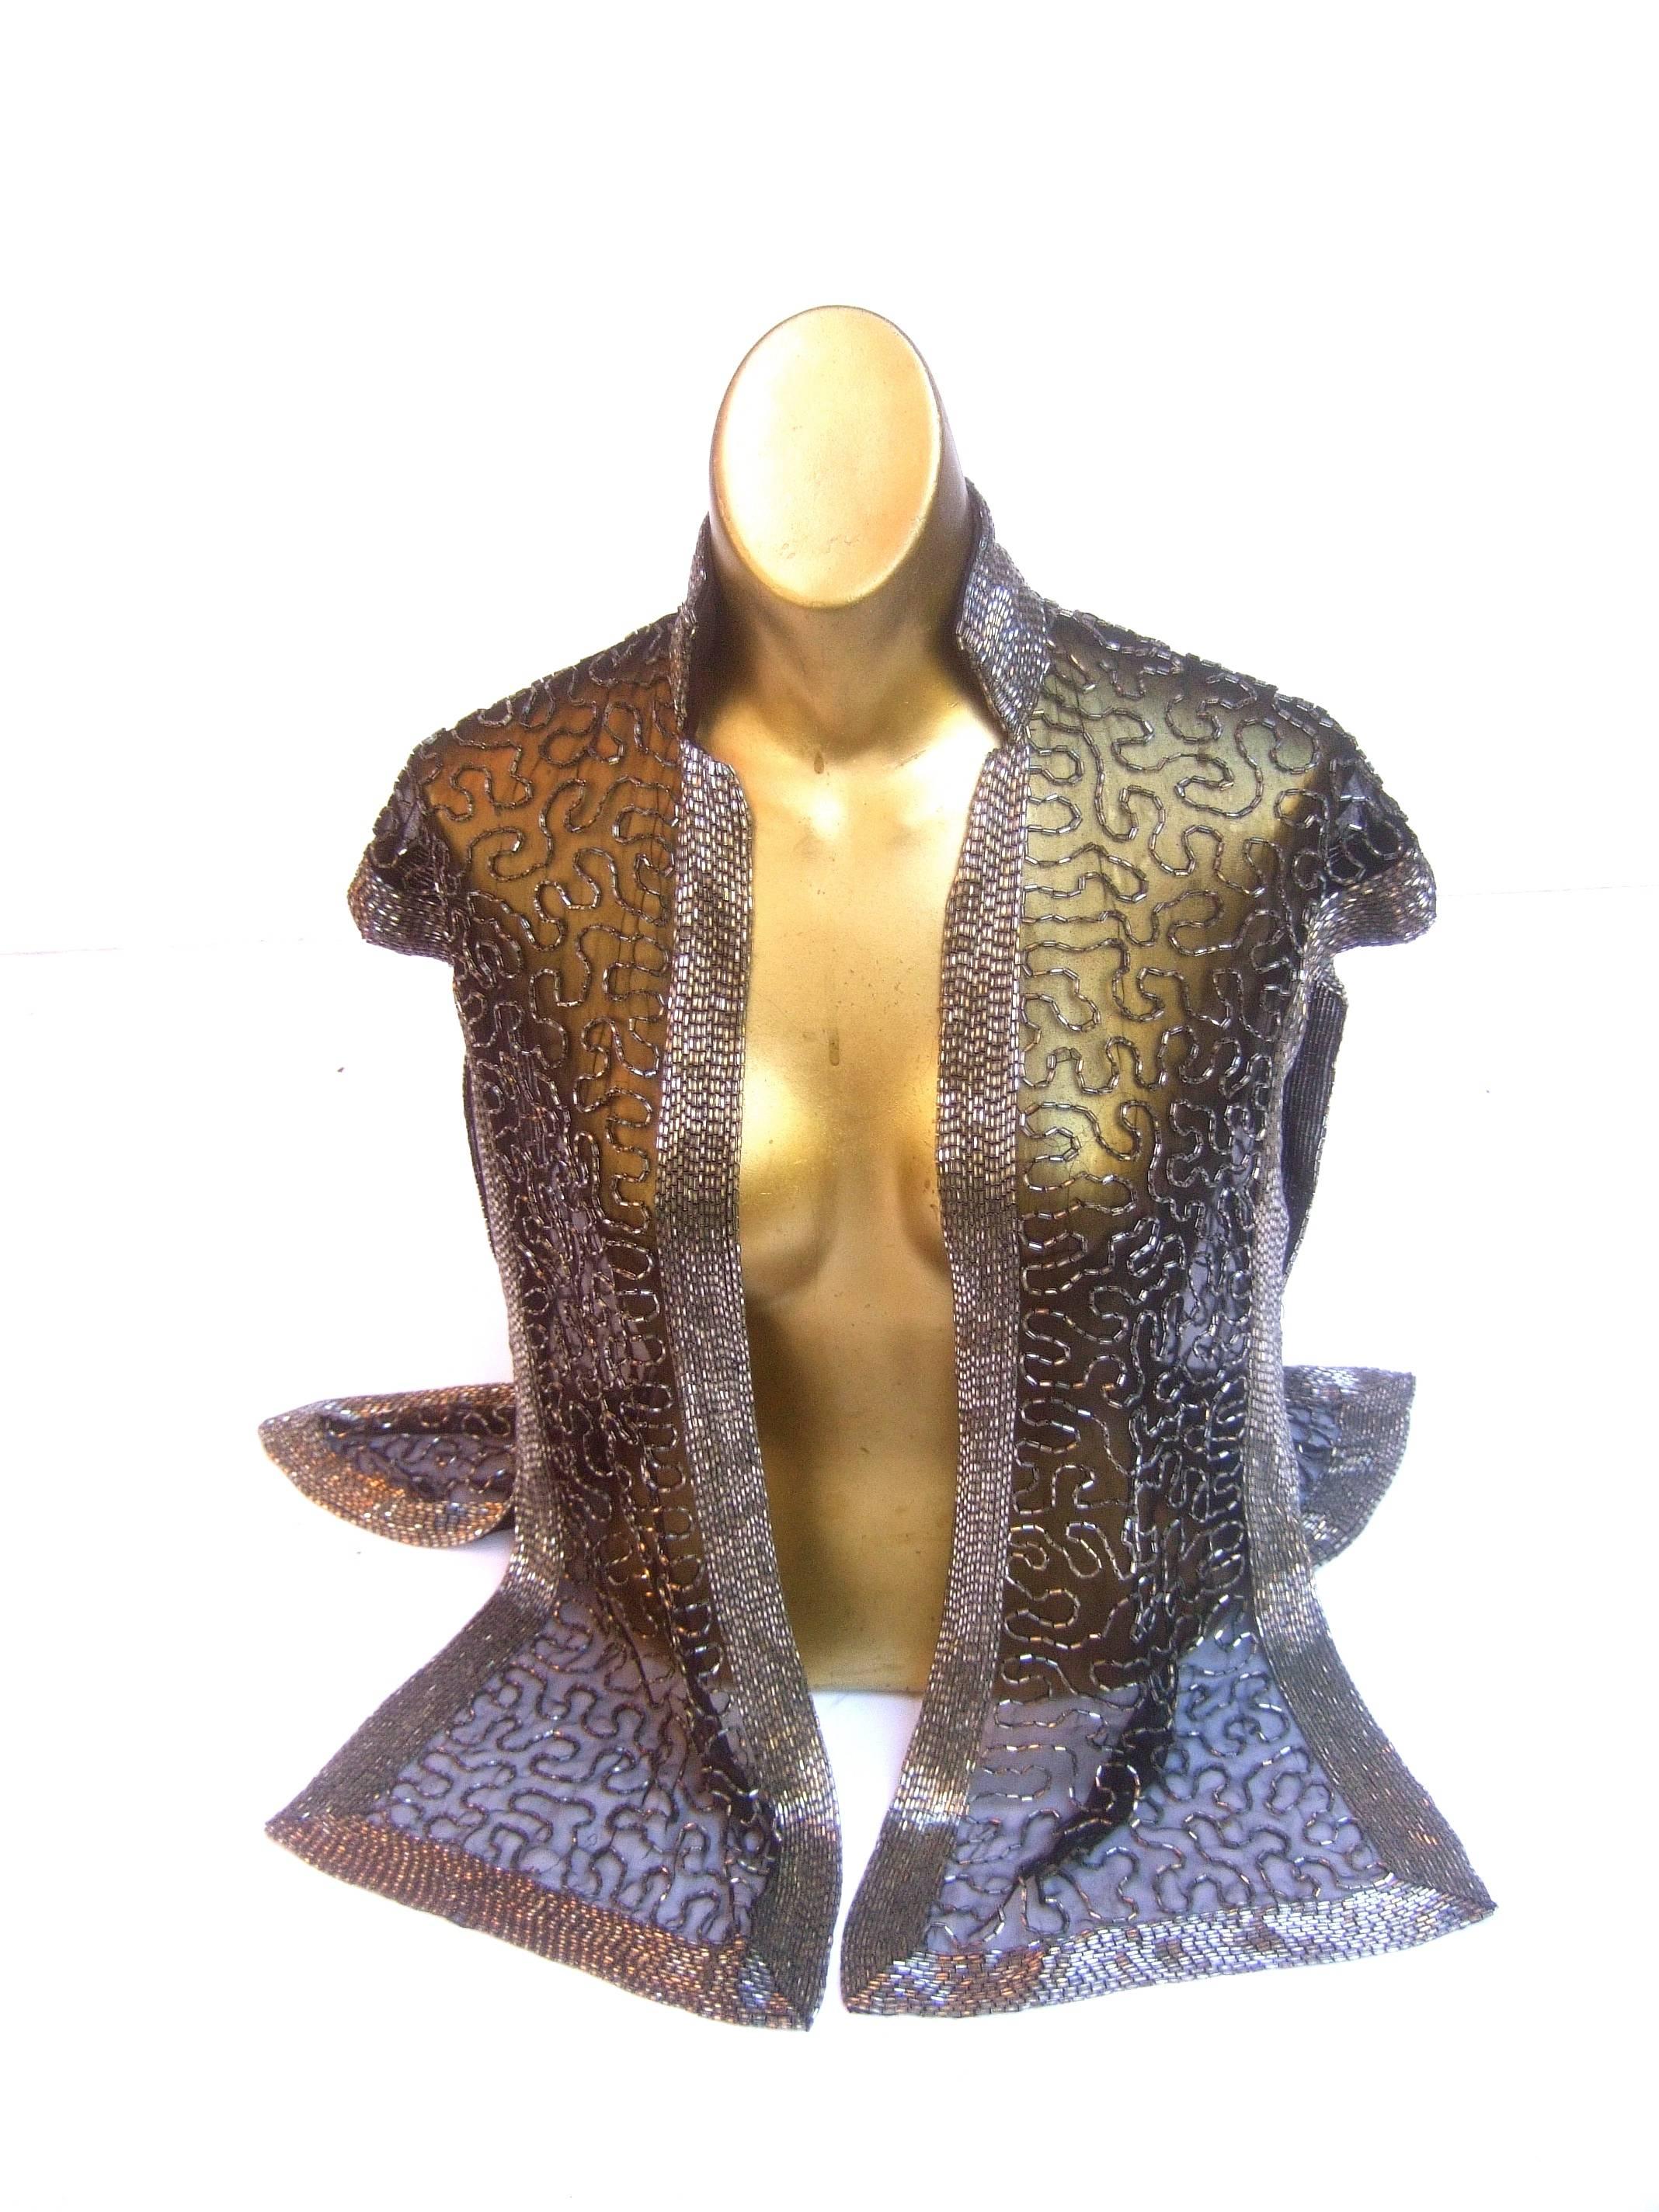 Exquisite silver glass beaded sheer vest c 1970s 
The elegant sheer black vest is embellished 
with sinuous trails of silver glass bugle beads

Framed with wide rows of contiguous silver
glass bugle beads. The elaborate glass beads
are substantial